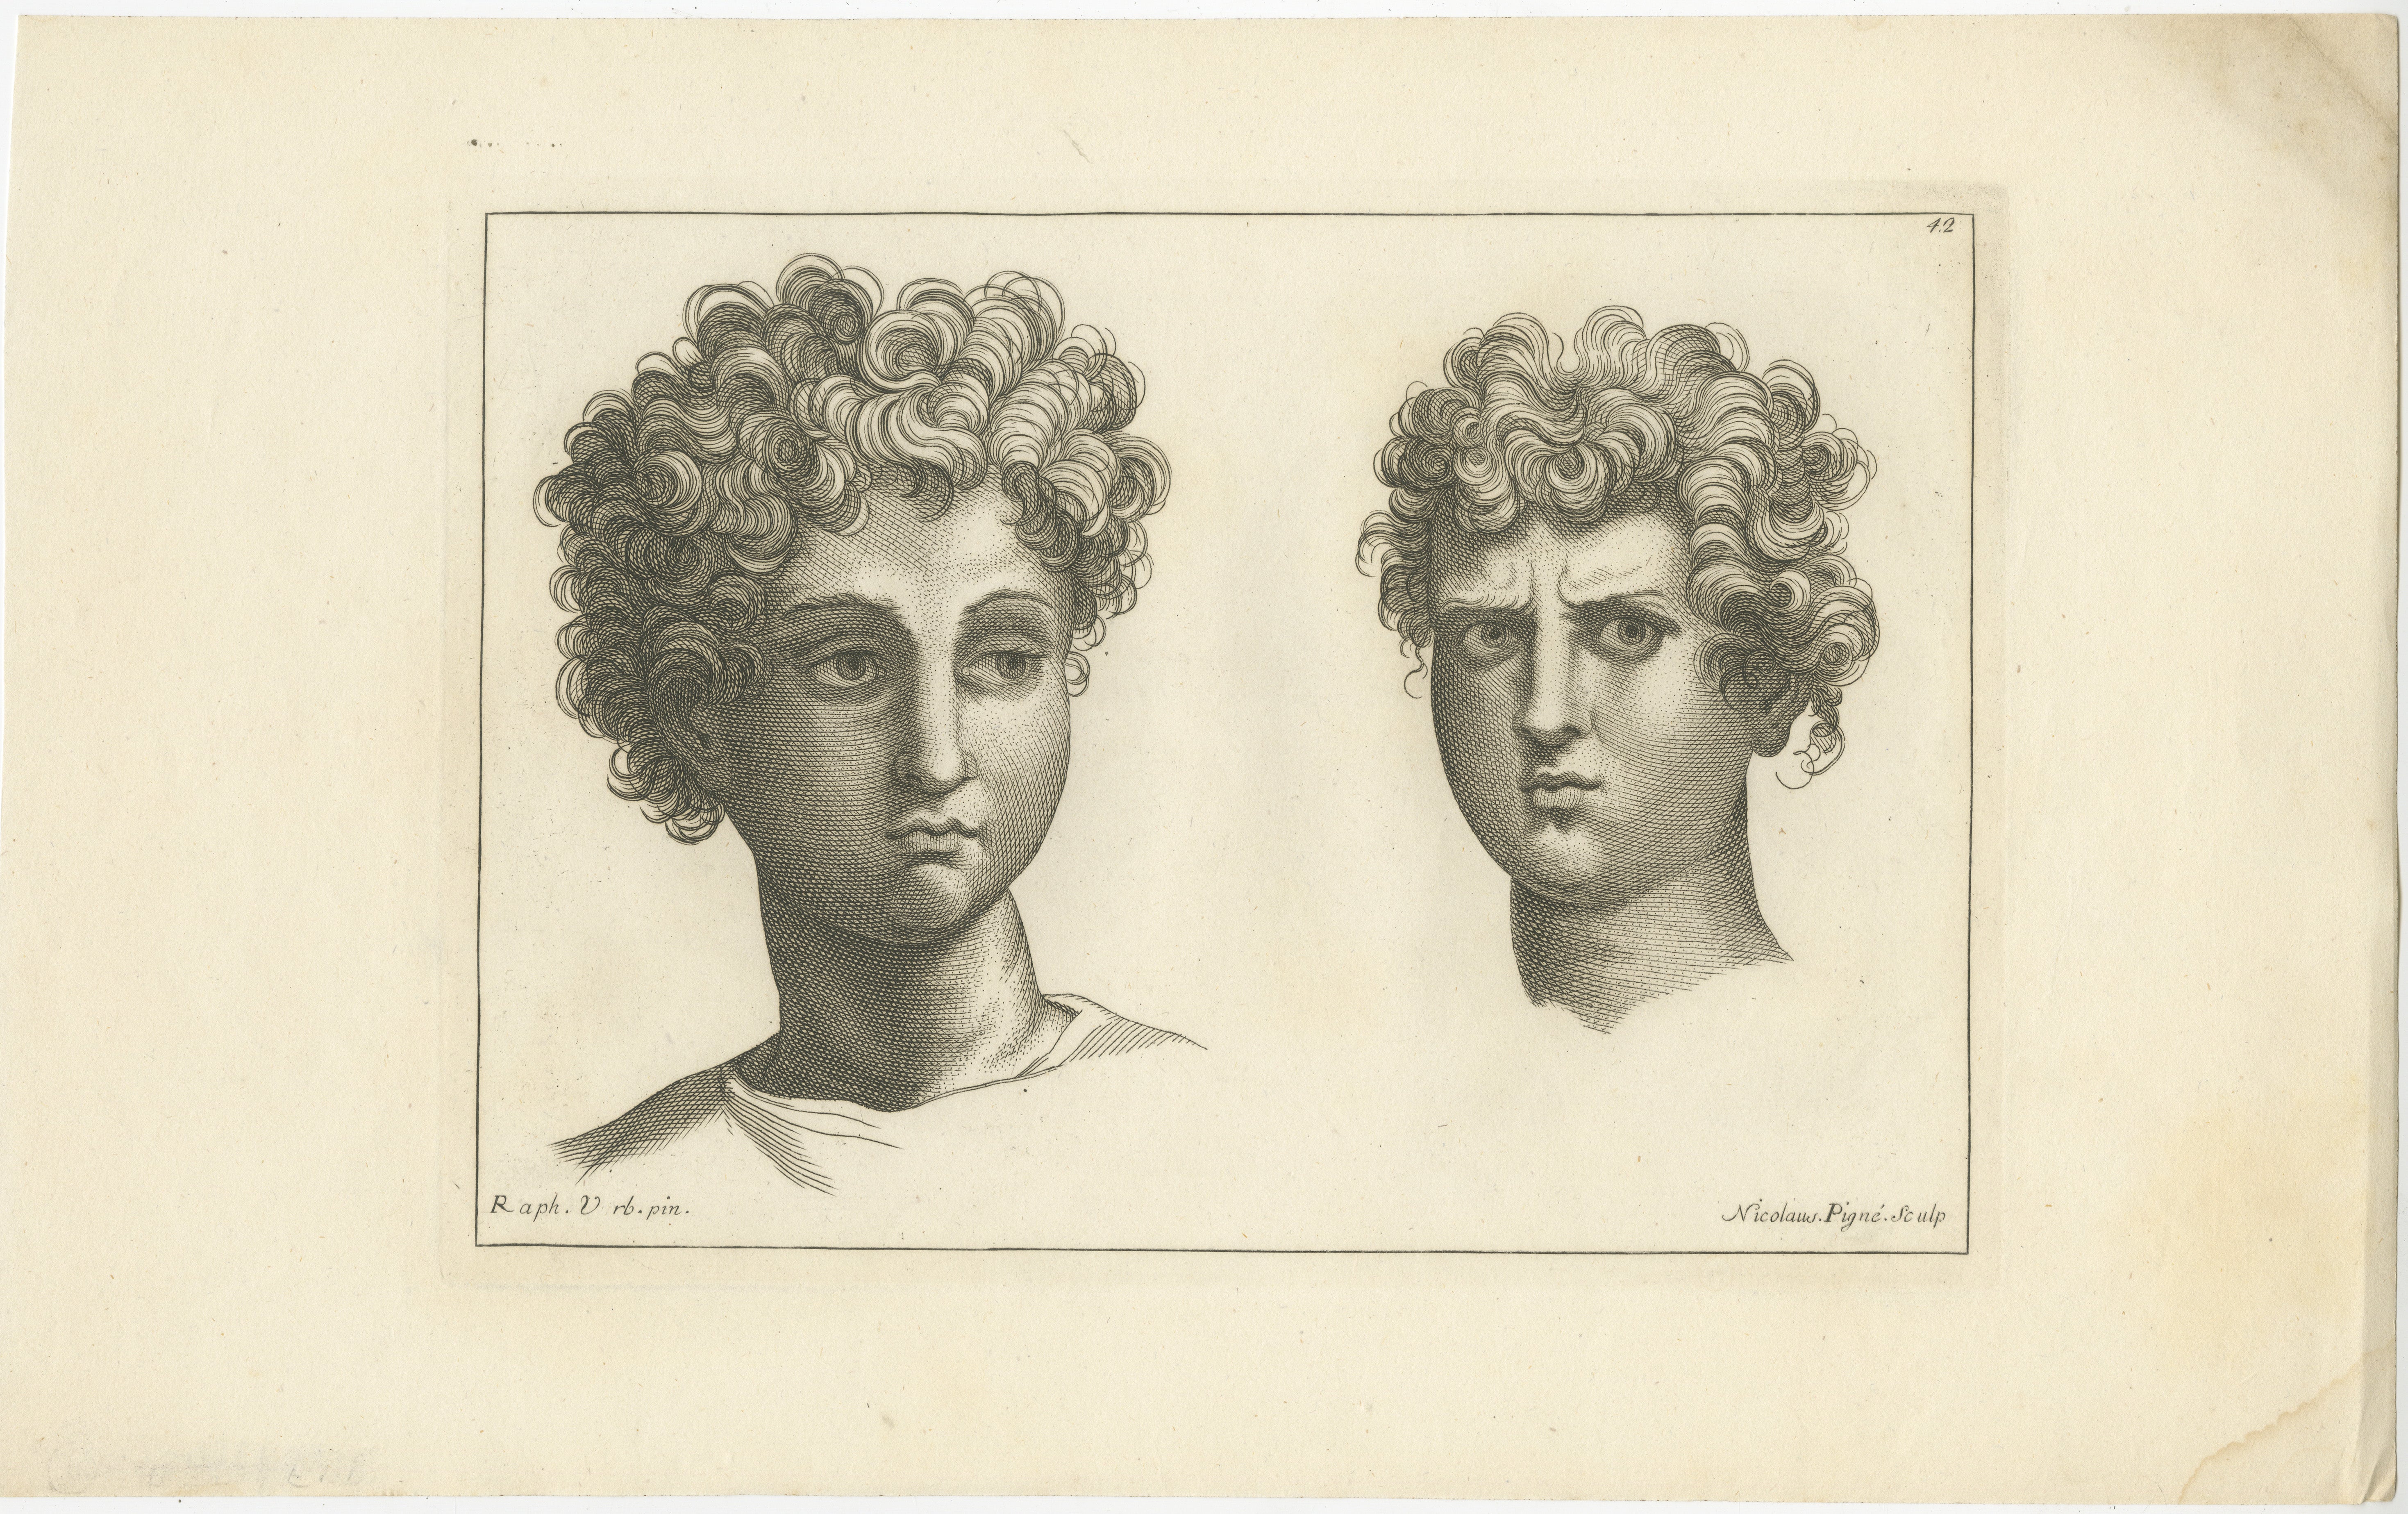 This engraving showcases two striking male profiles, each rendered with remarkable detail, characteristic of the 